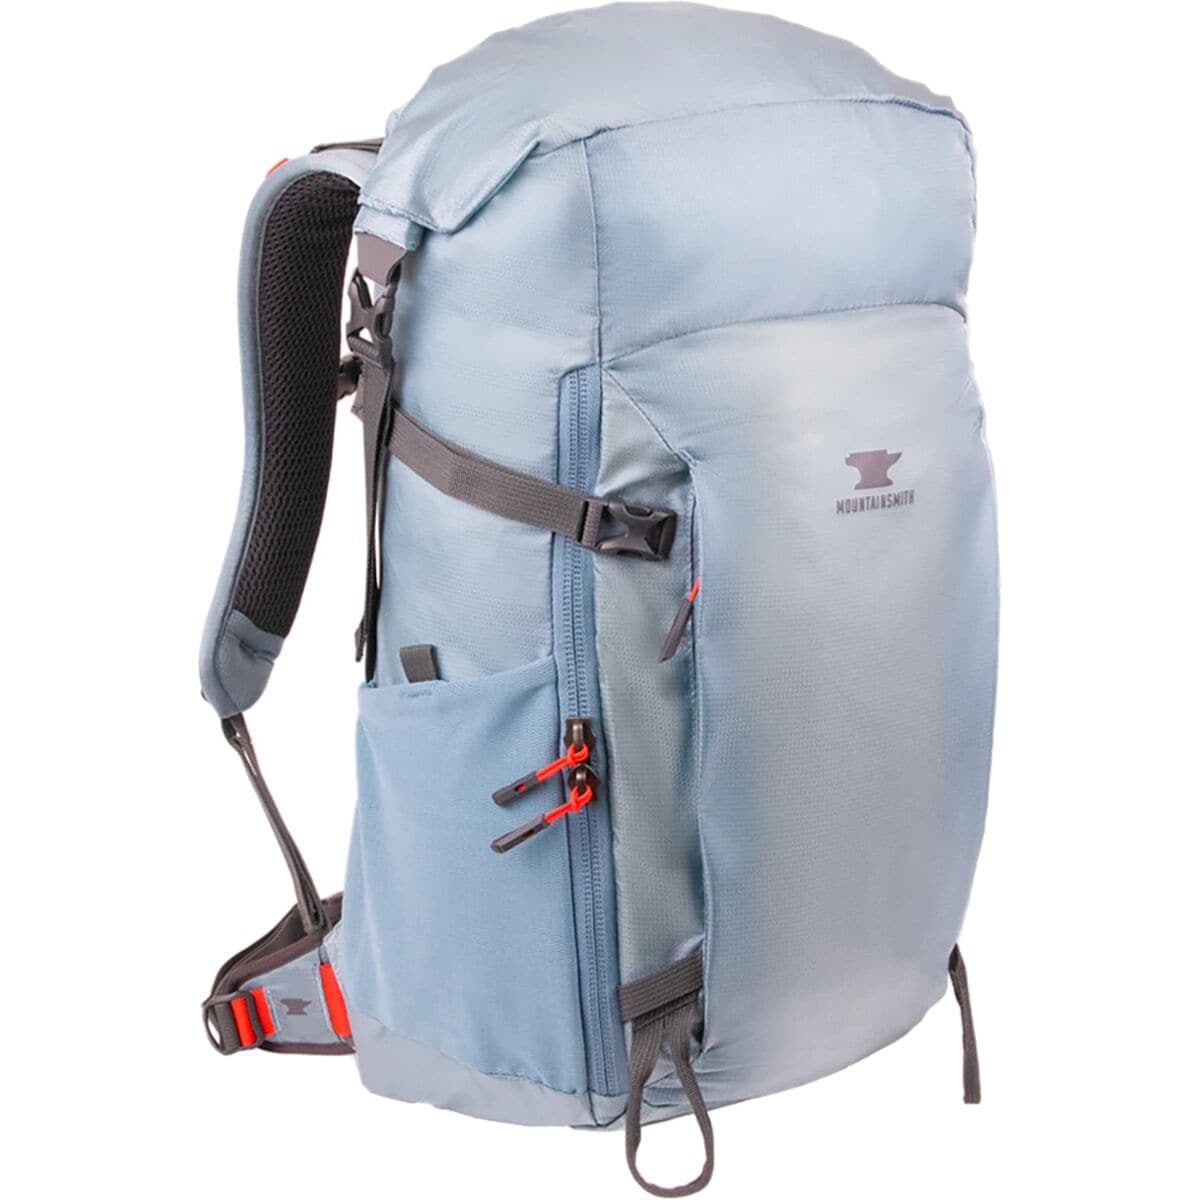 Mountainsmith Scream 30L Backpack